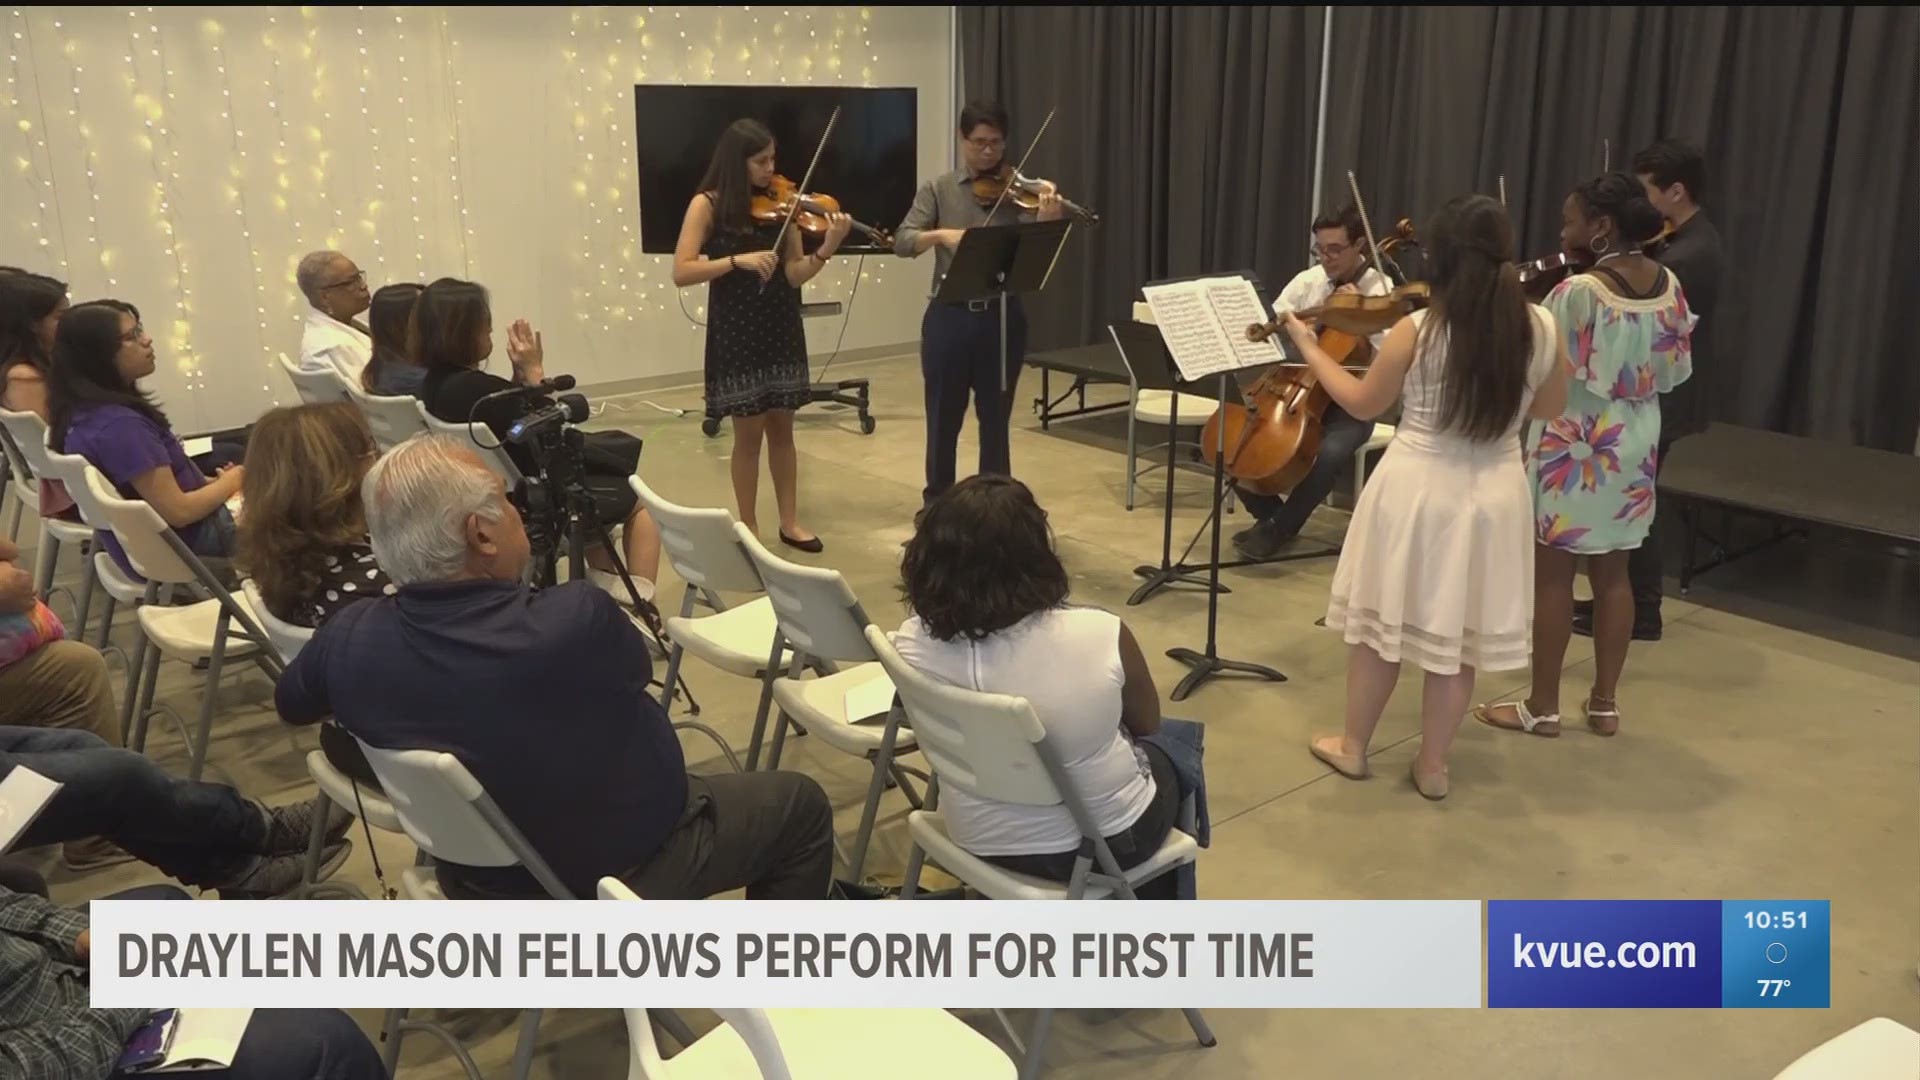 Students of the Draylen Mason Fellows Program performed together for the first time Thursday.